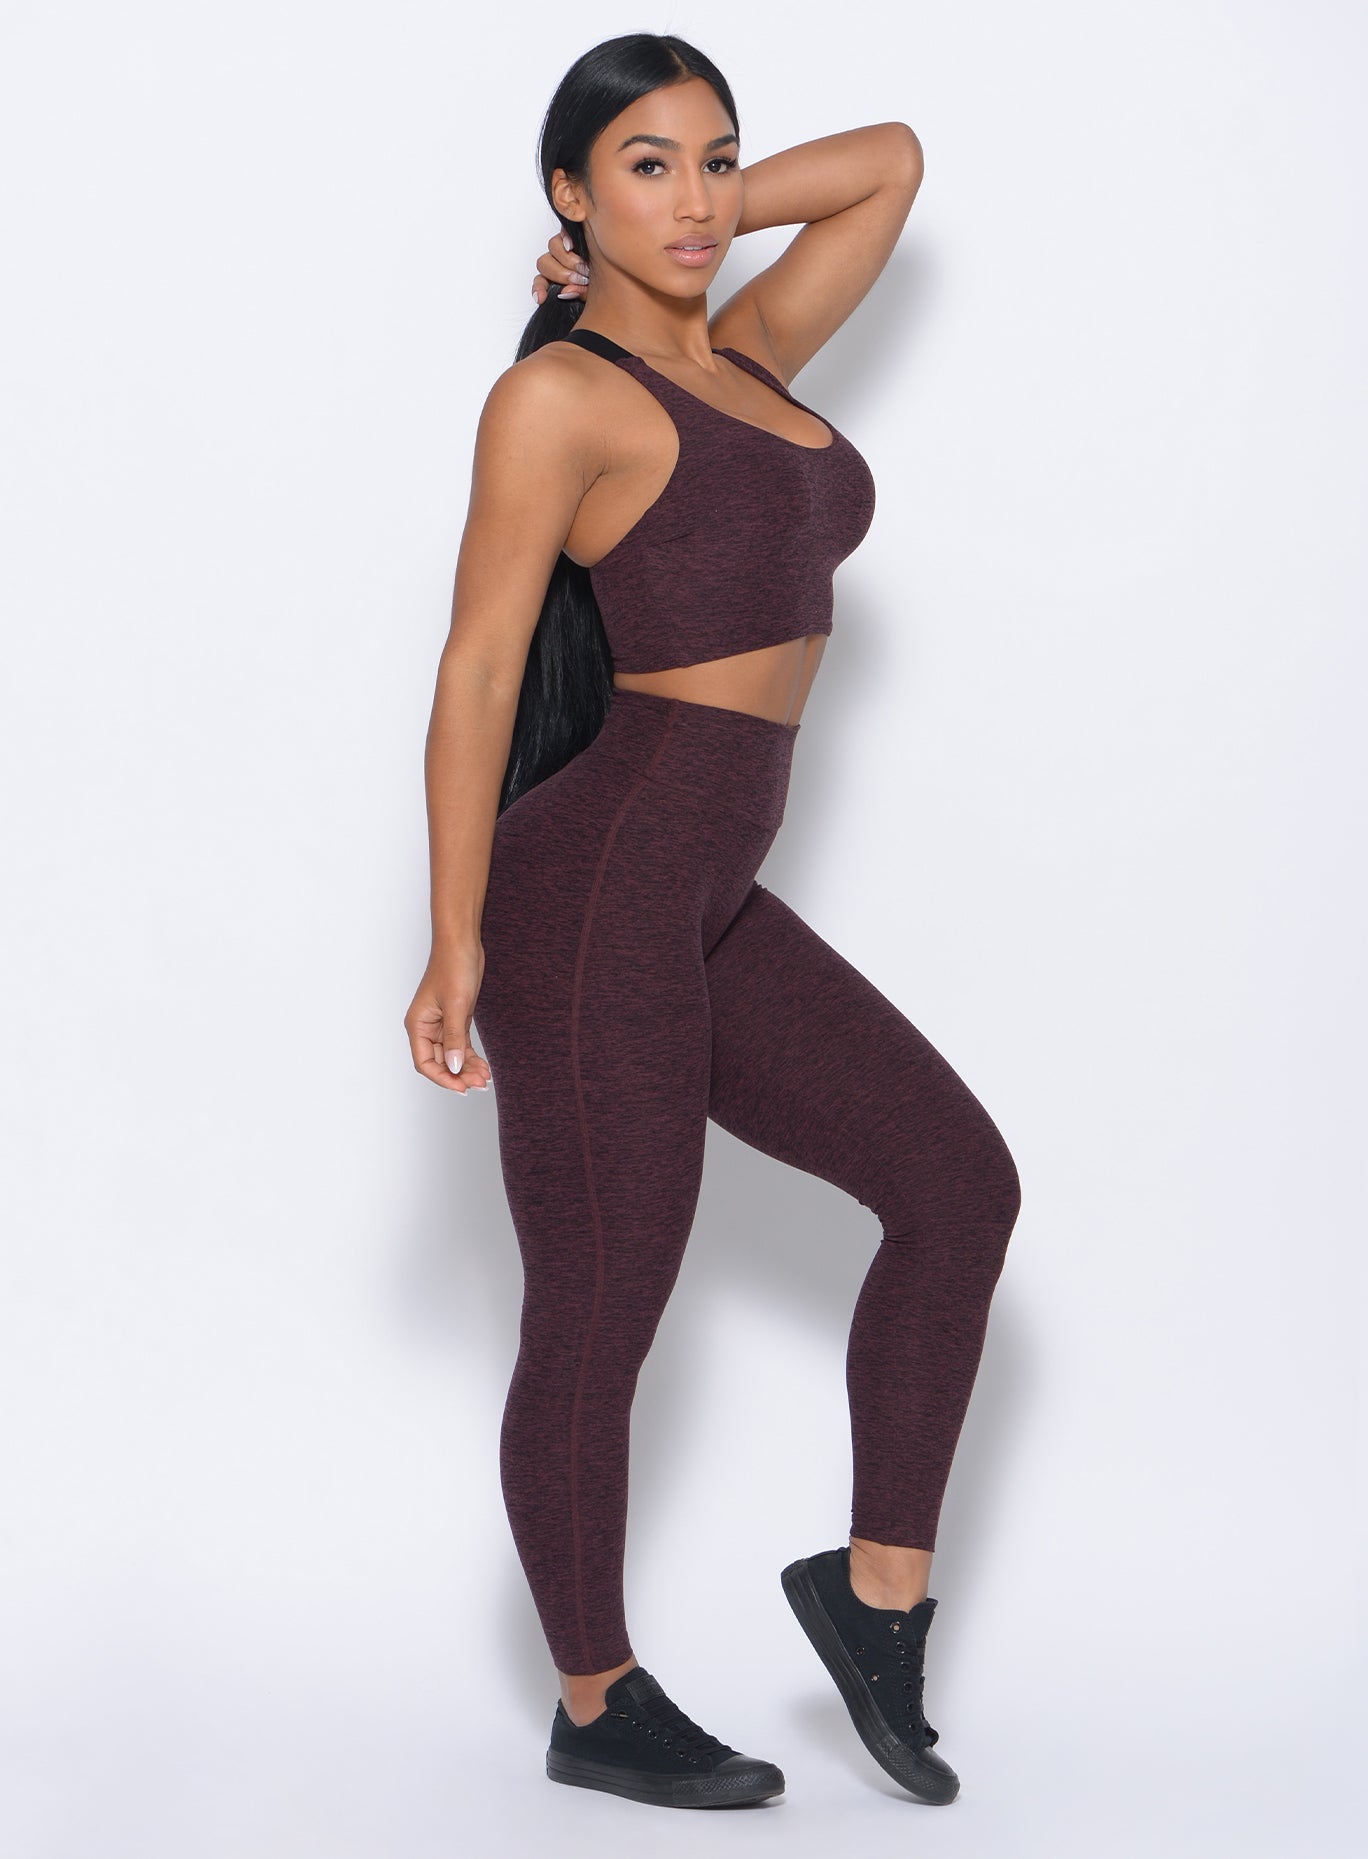 Right side view of the model wearing our boost leggings in port color and a matching bra